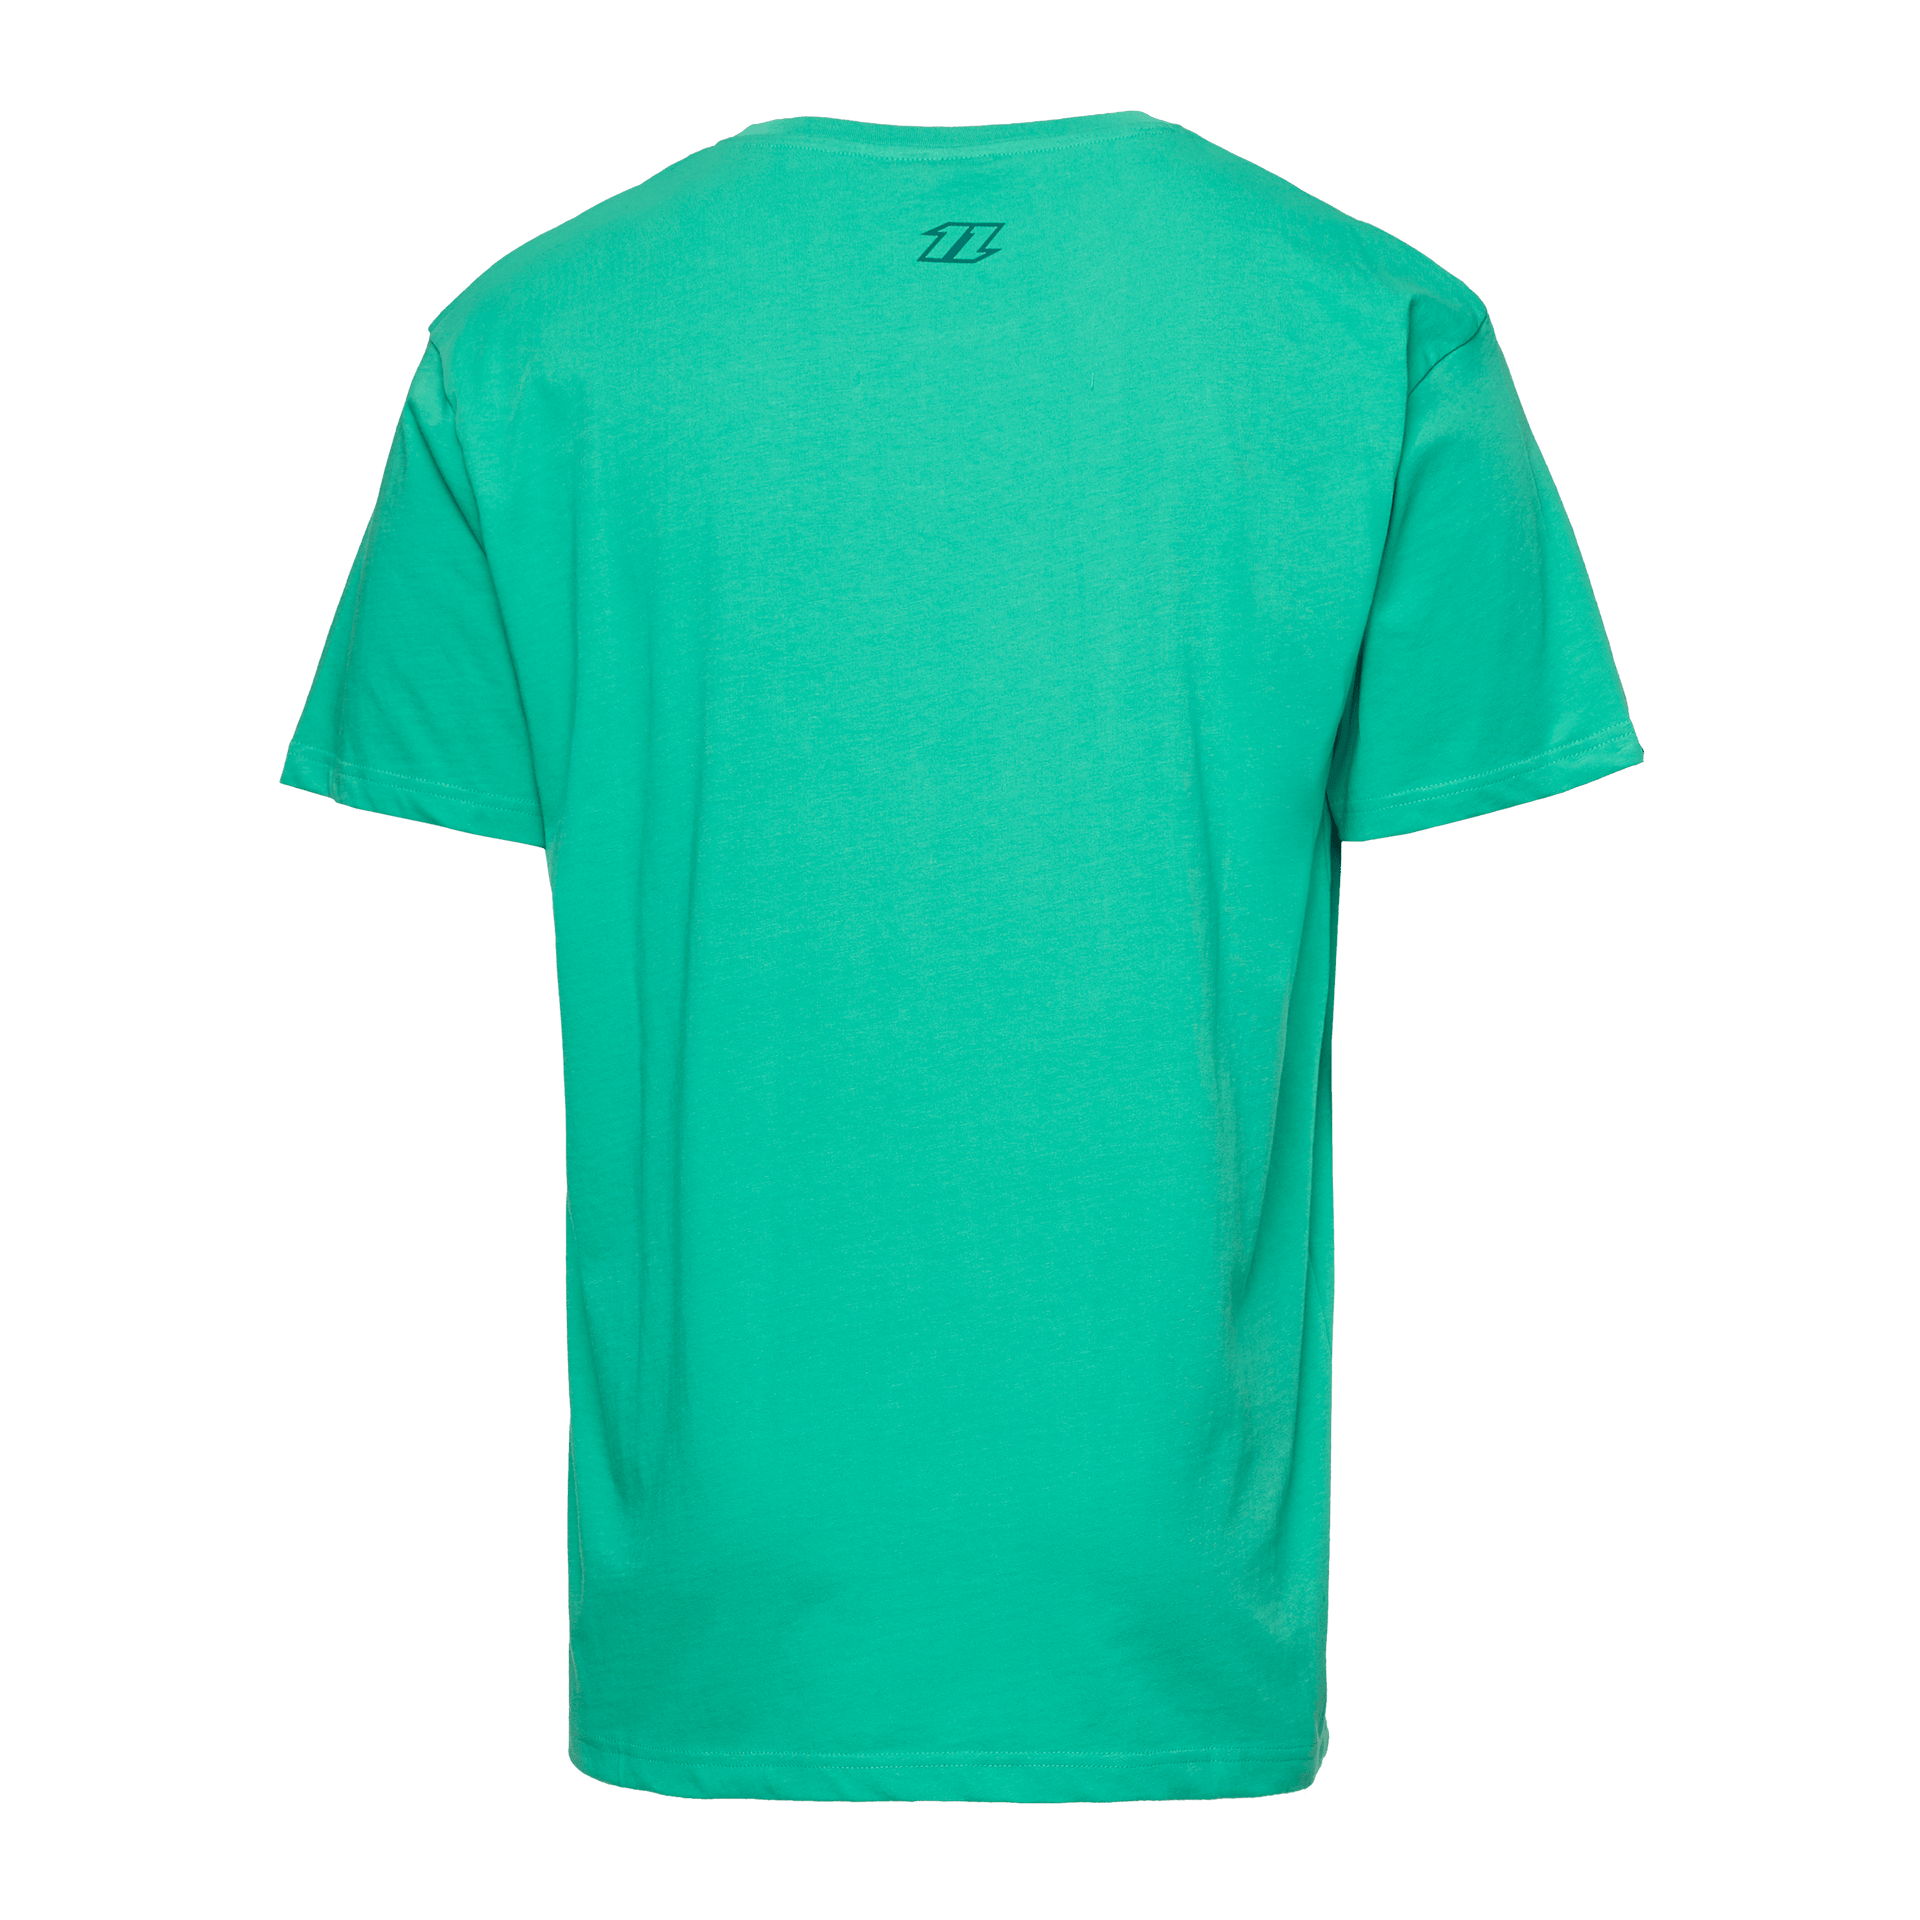 Product_image_2_North Green